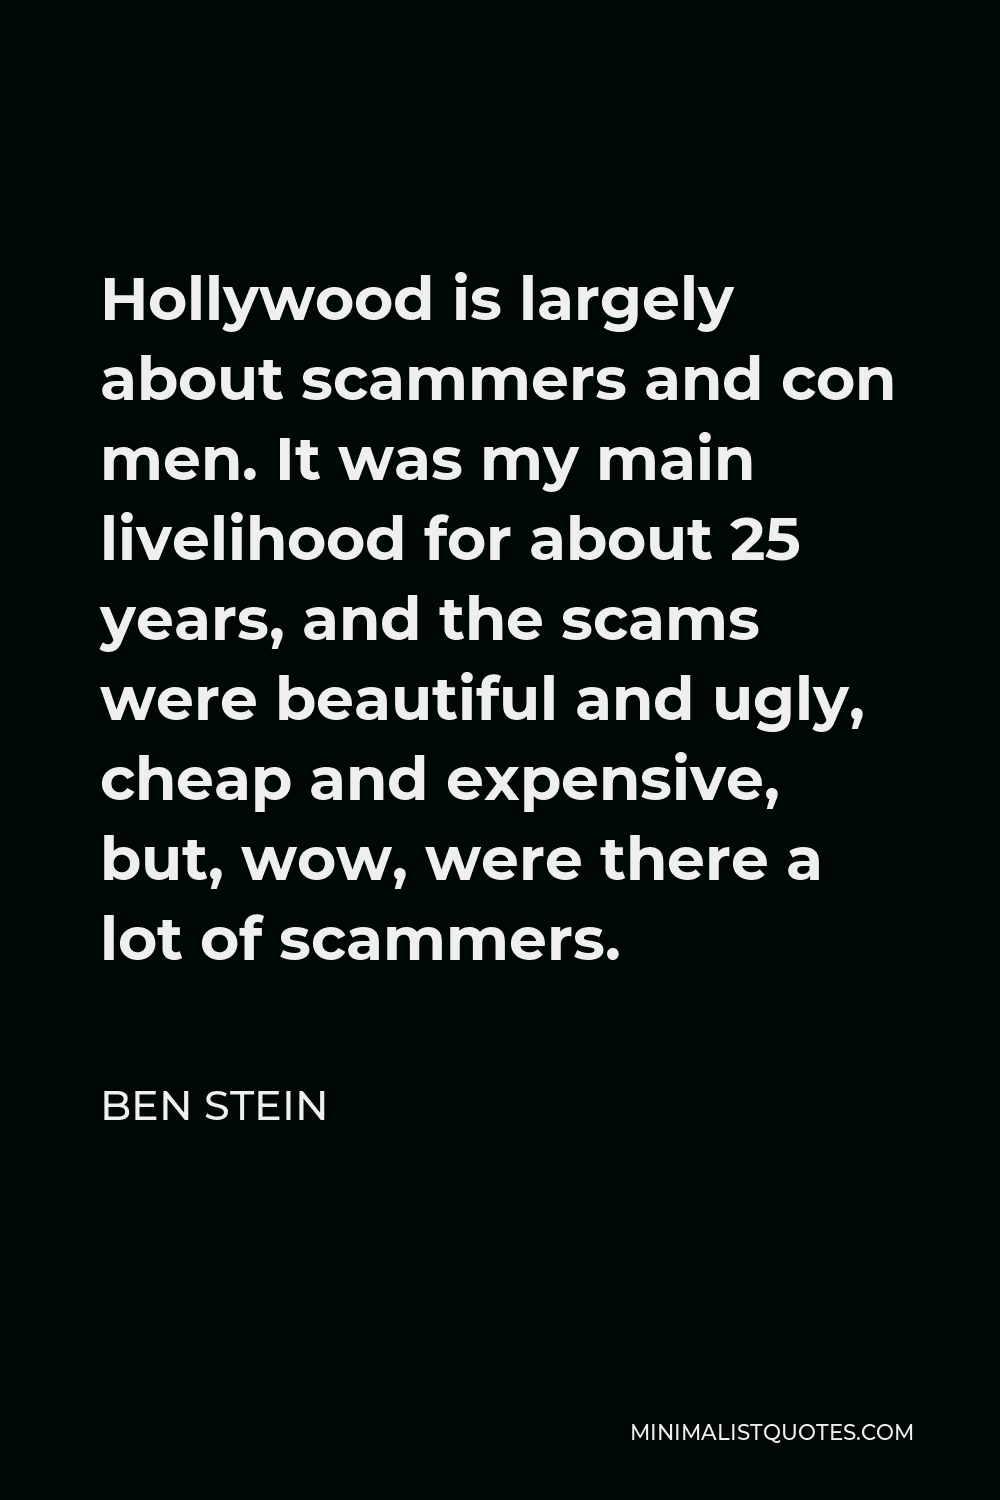 Ben Stein Quote - Hollywood is largely about scammers and con men. It was my main livelihood for about 25 years, and the scams were beautiful and ugly, cheap and expensive, but, wow, were there a lot of scammers.